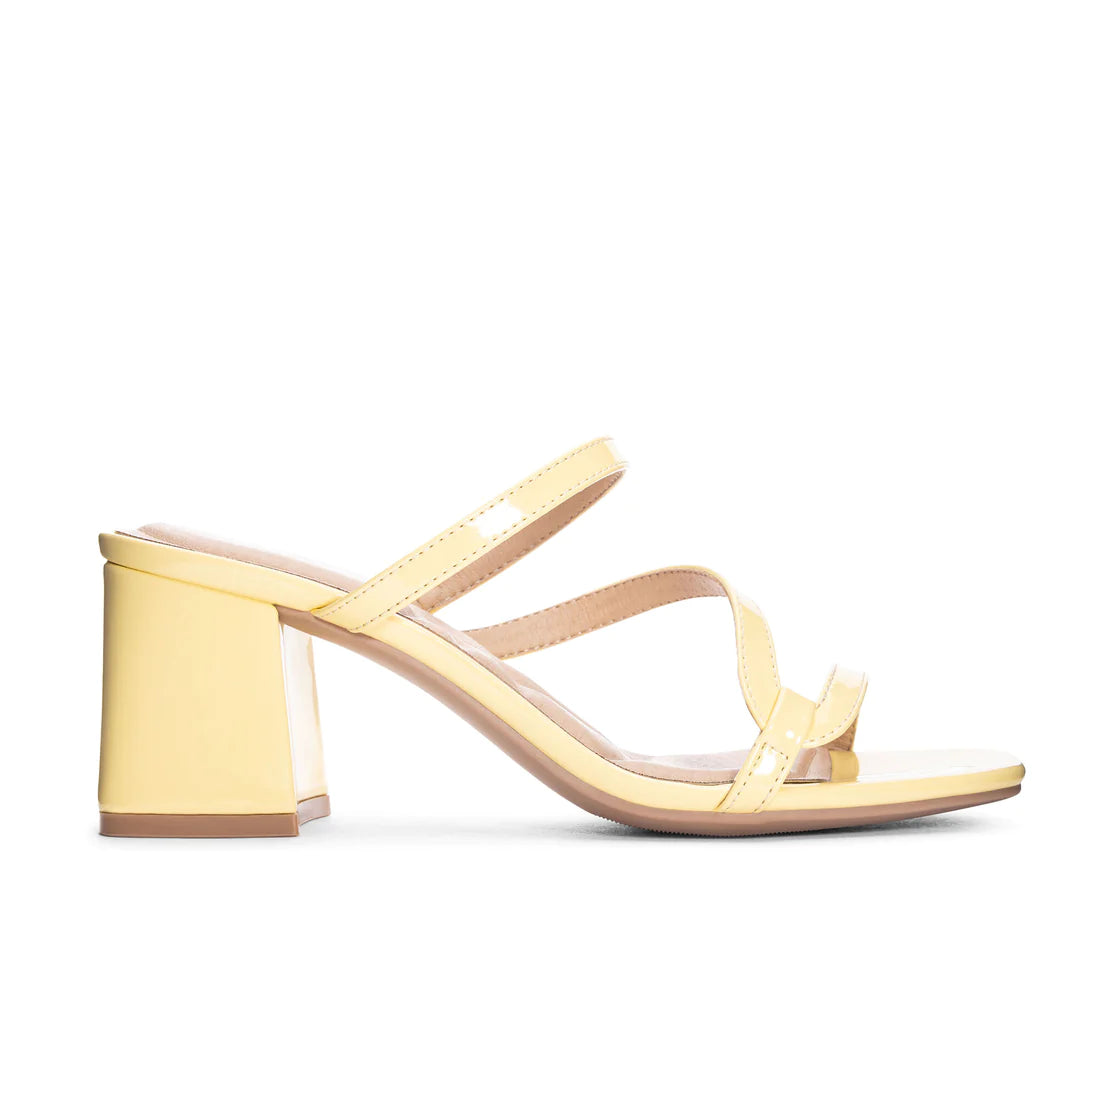 CL By Laundry Blaine Patent Light Yellow